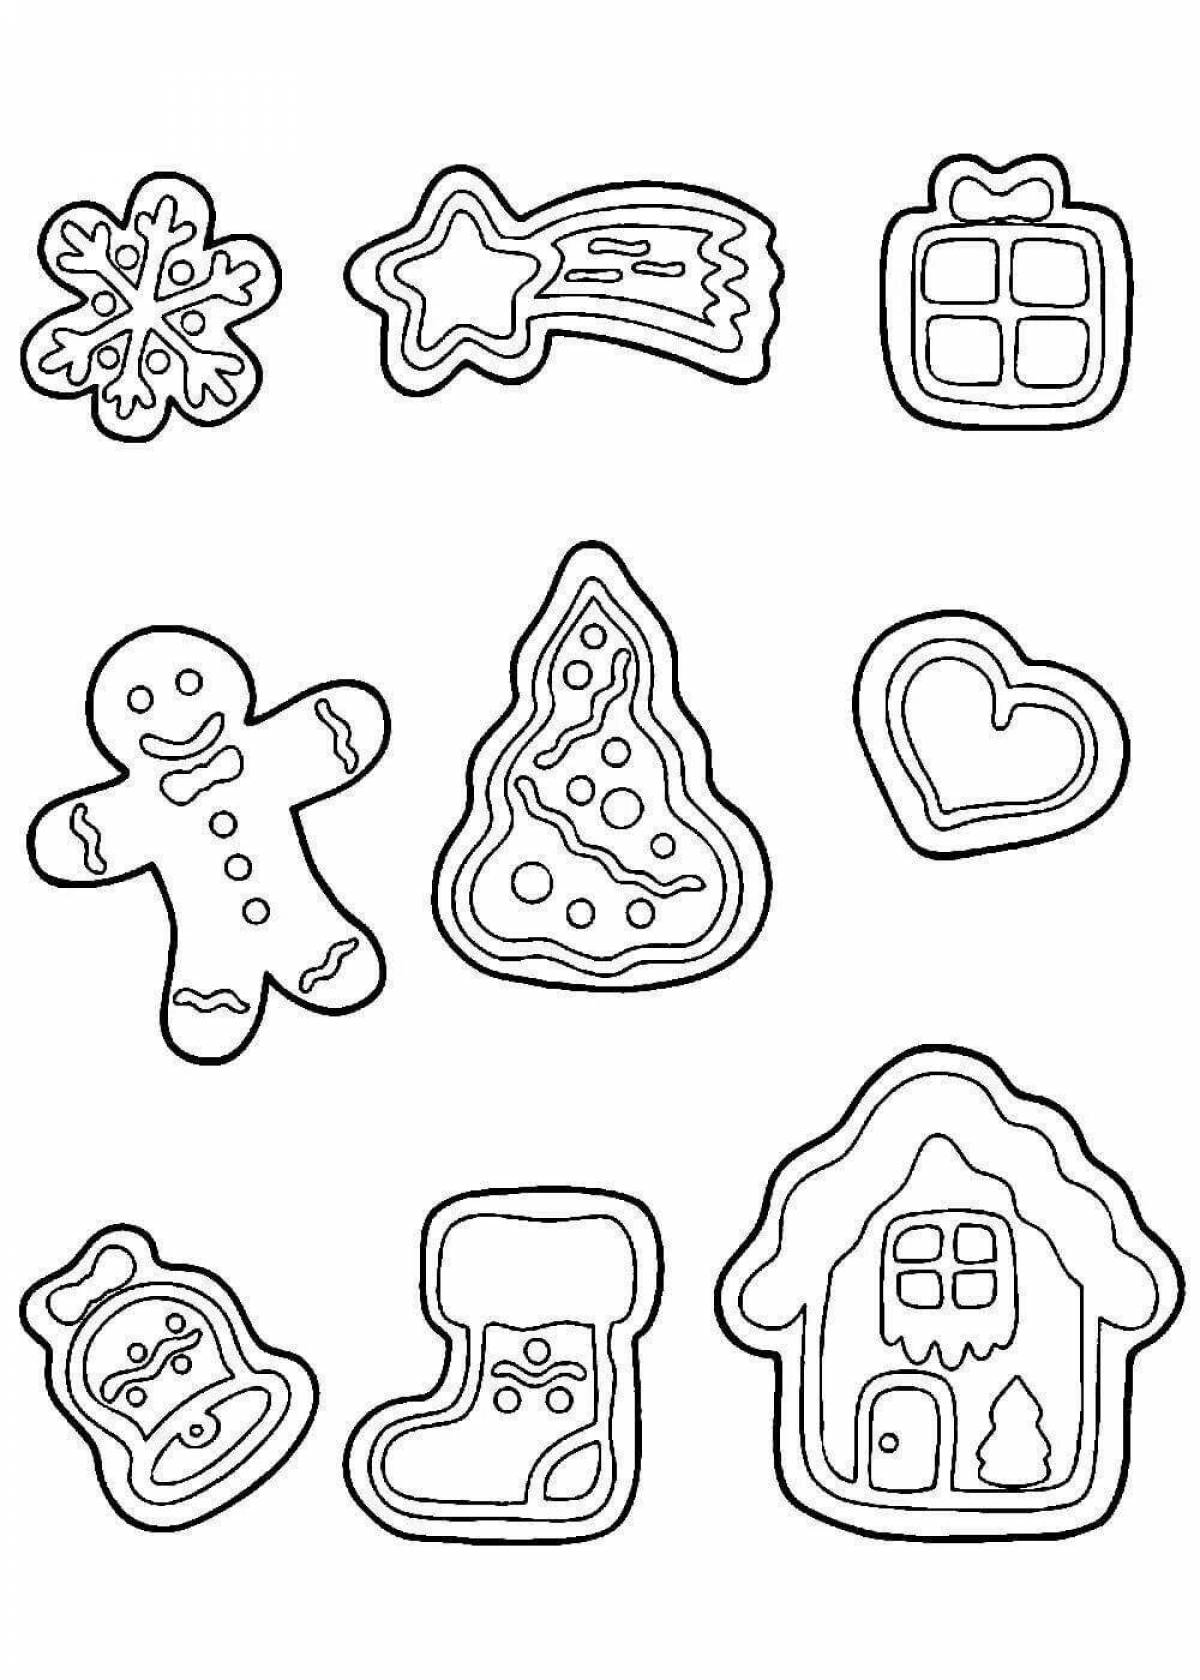 Artistic Christmas cookie coloring book